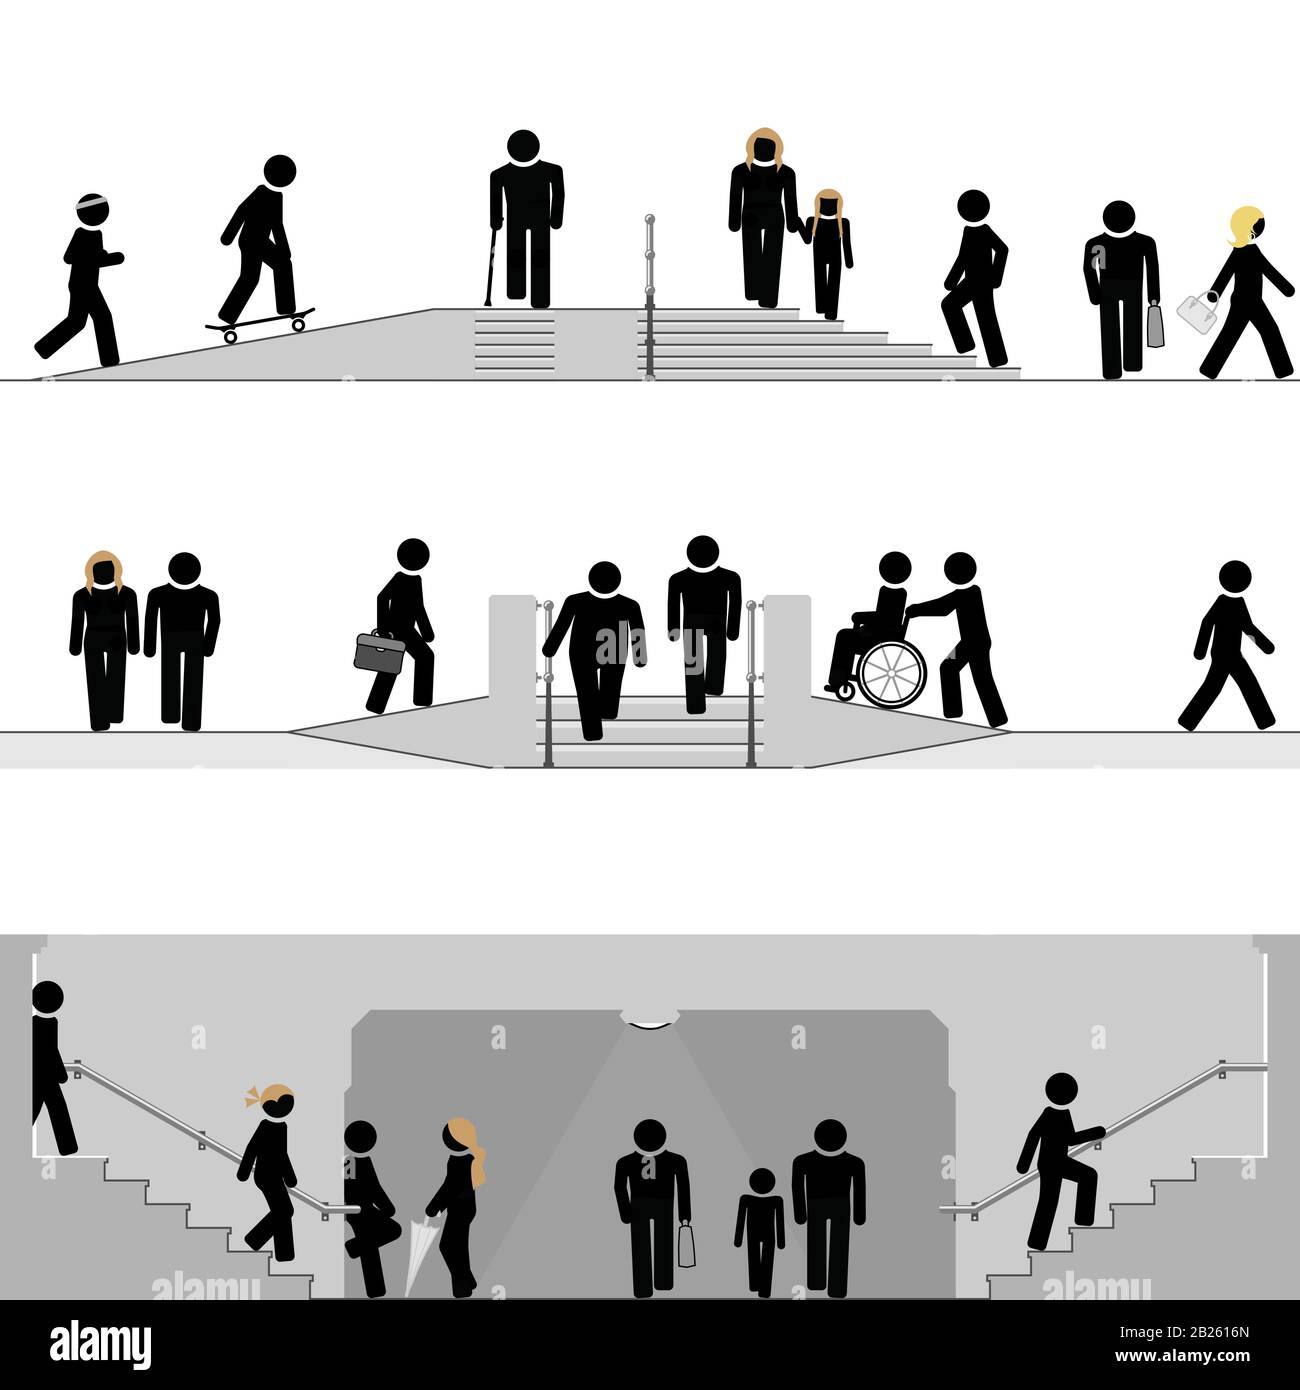 Public spaces equipped with stairs and ramps. Stock Vector